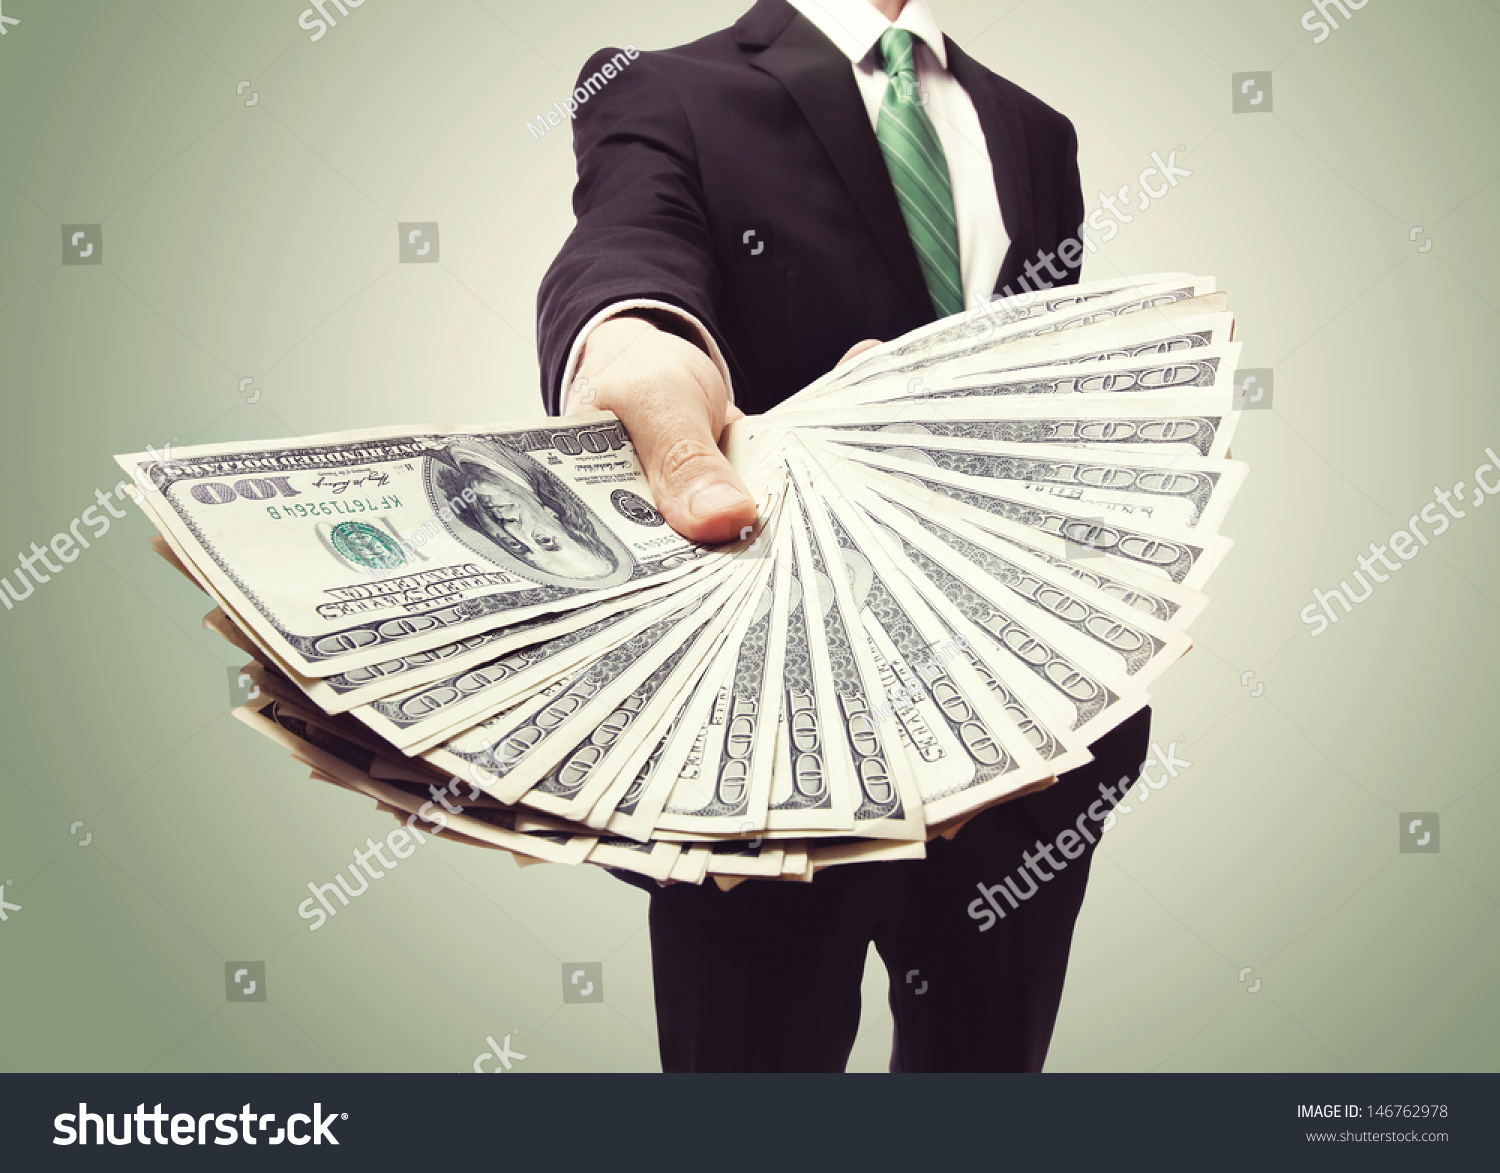 Business Man Displaying a Spread of Cash over a green vintage background #146762978